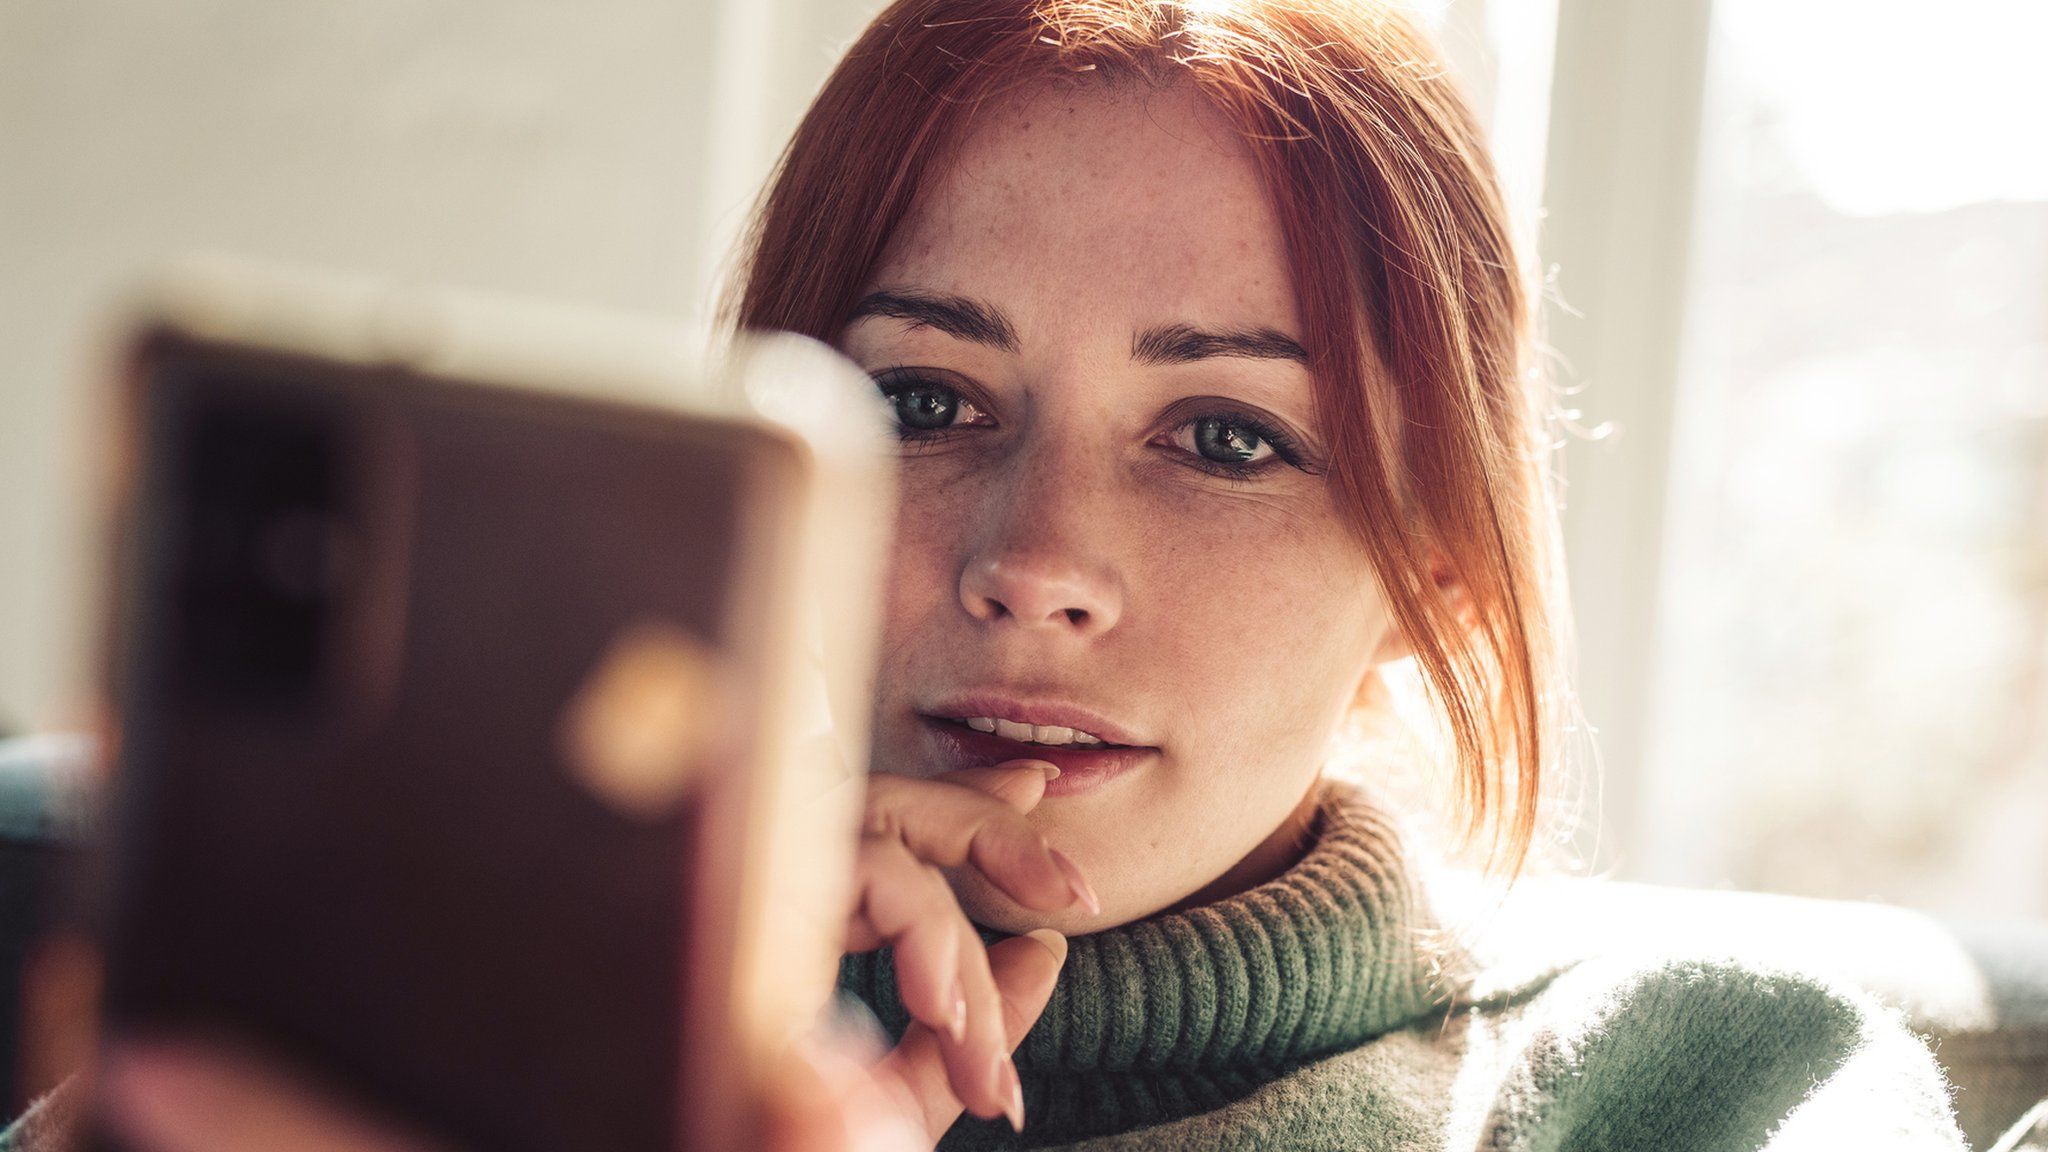 Woman with red hair looking on screen of her mobile phone